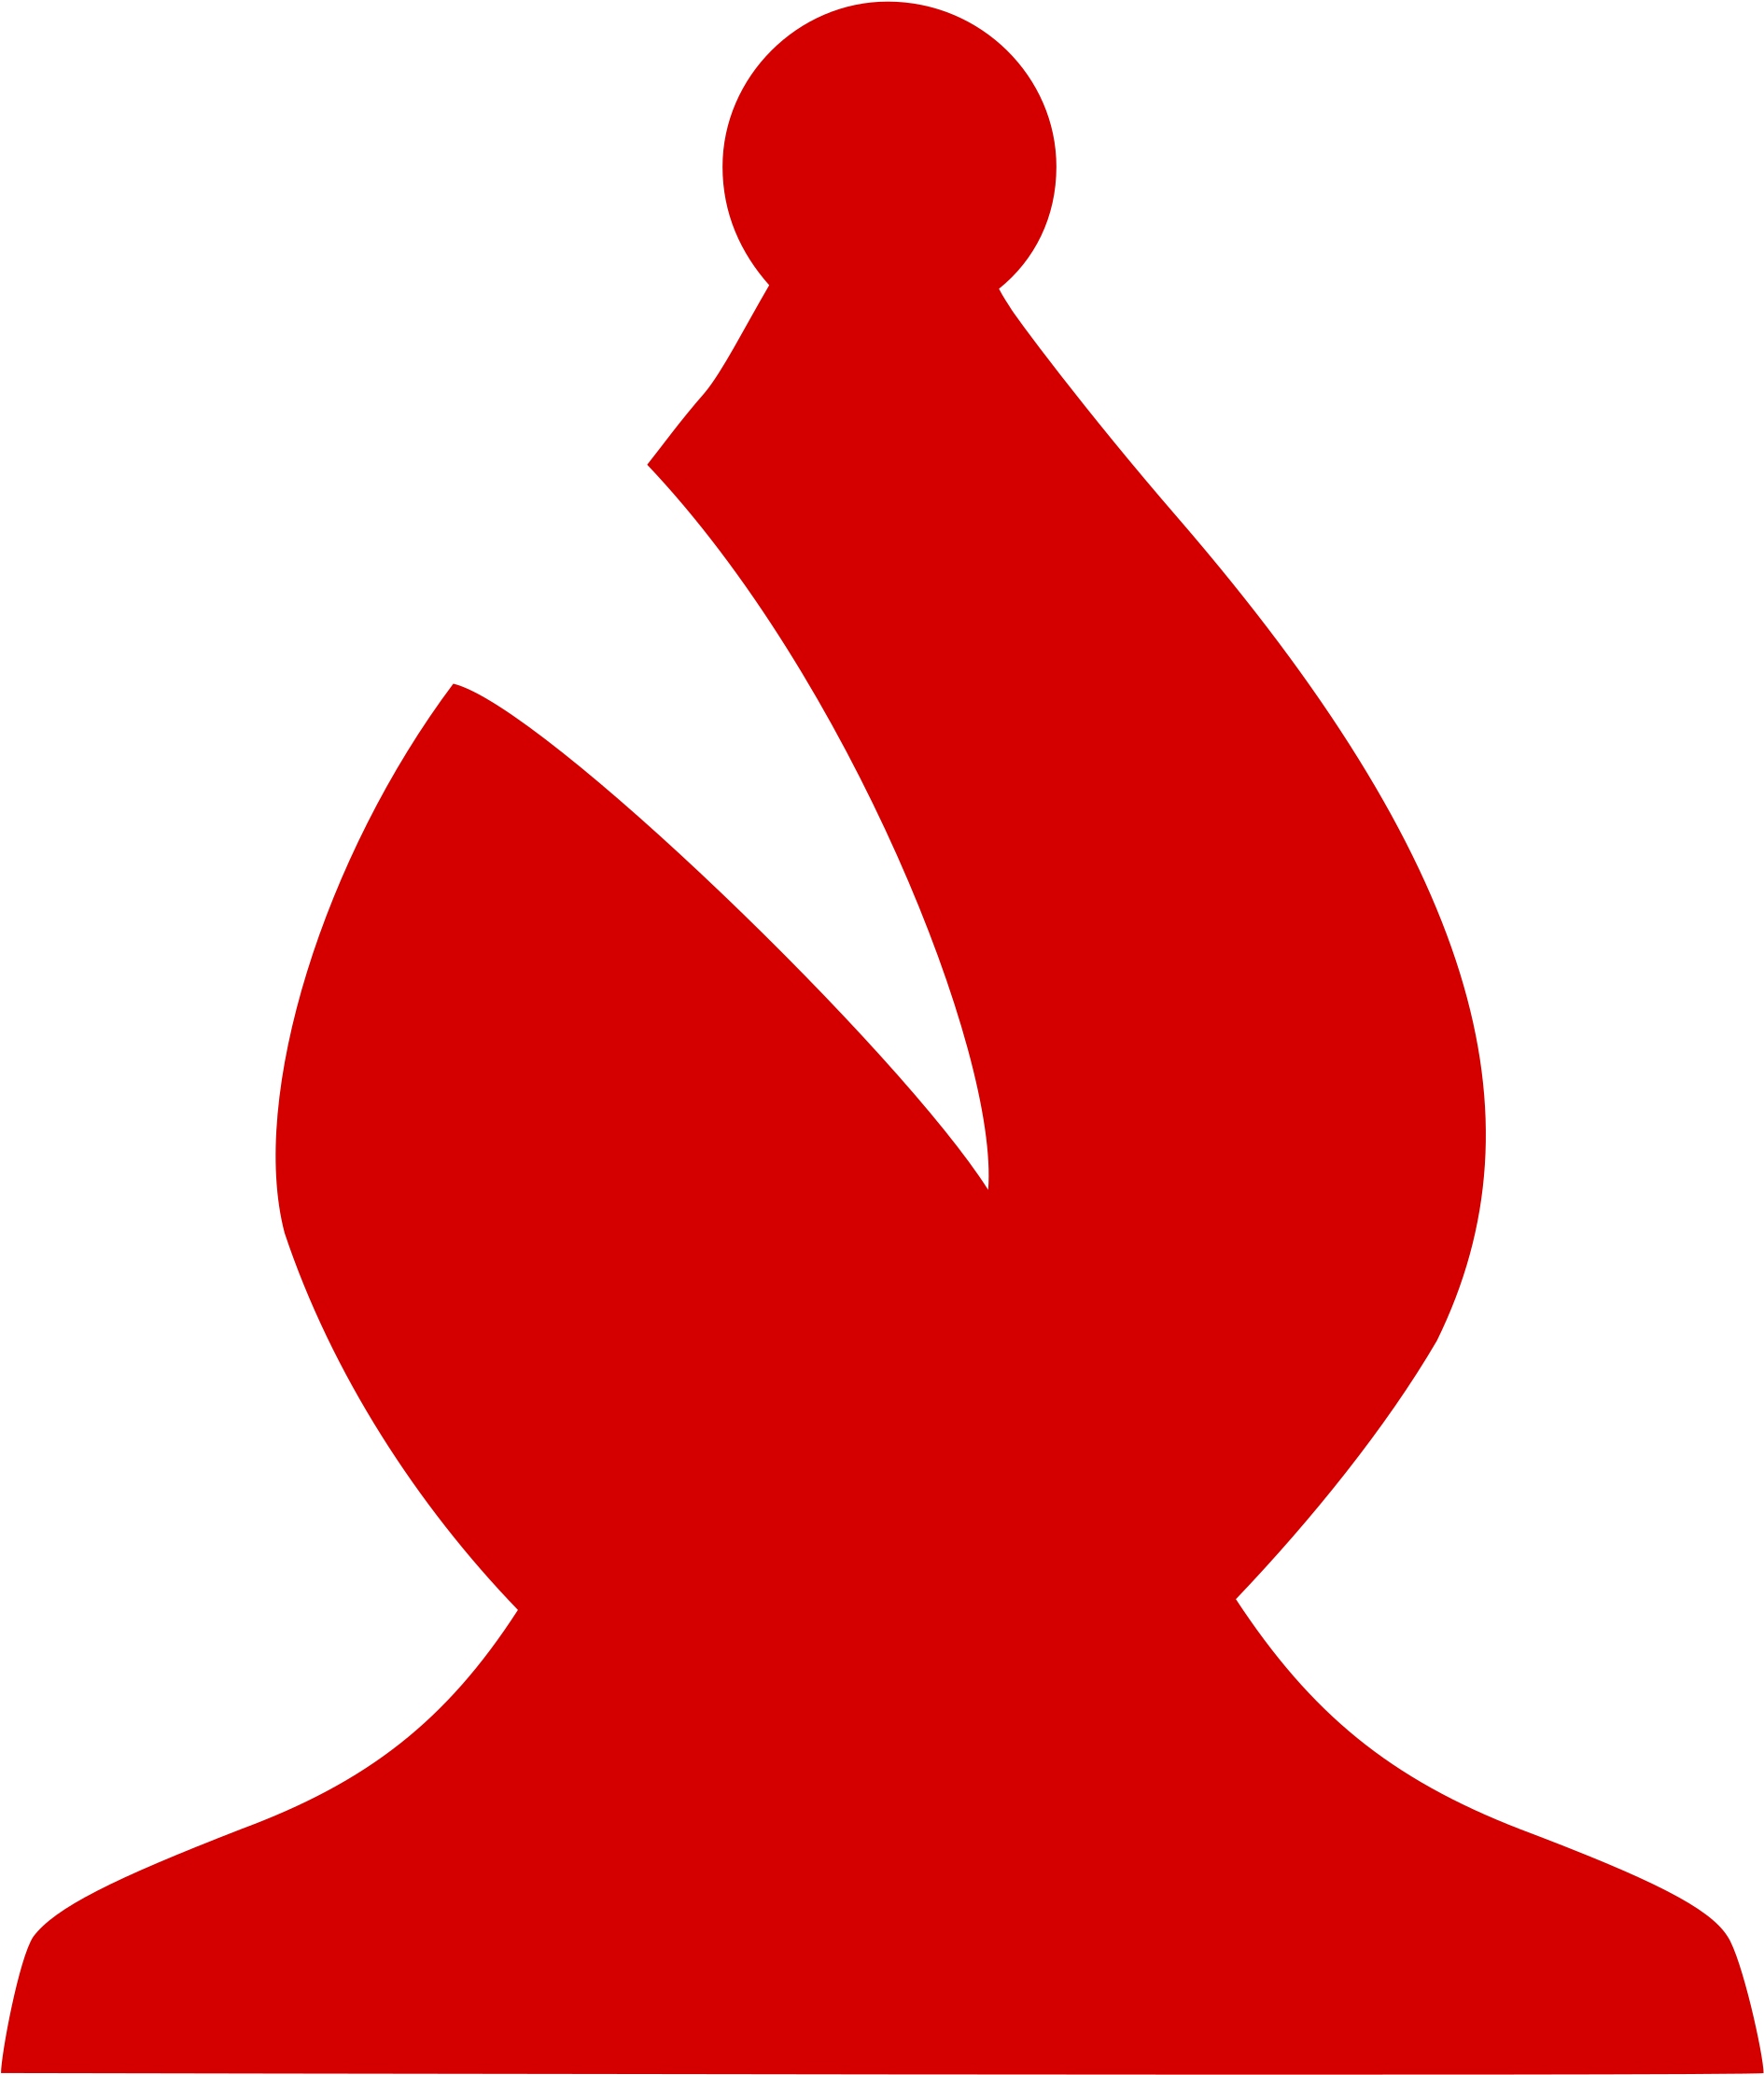 Chess Piece Silhouette - Red Bishop Chess Piece (2400x2400)